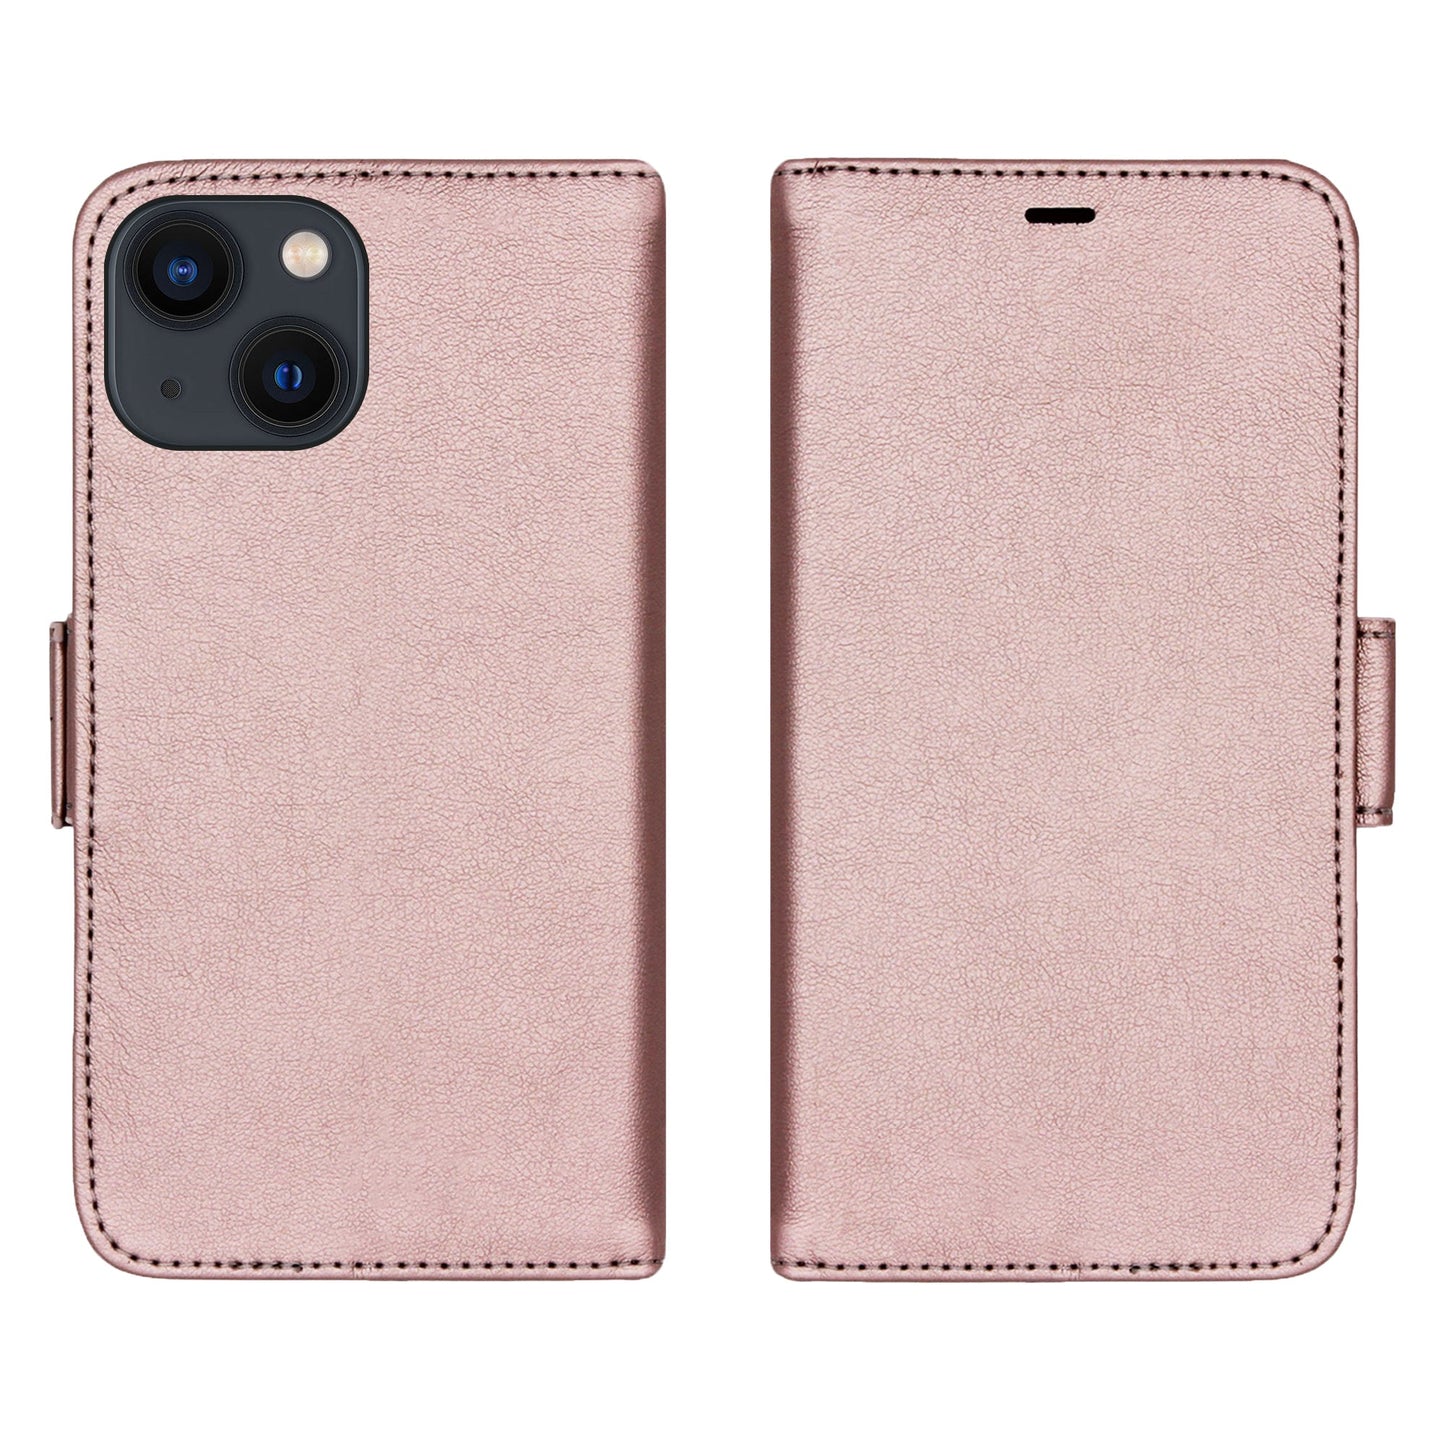 Solid rose gold Victor case for iPhone 13 Mini